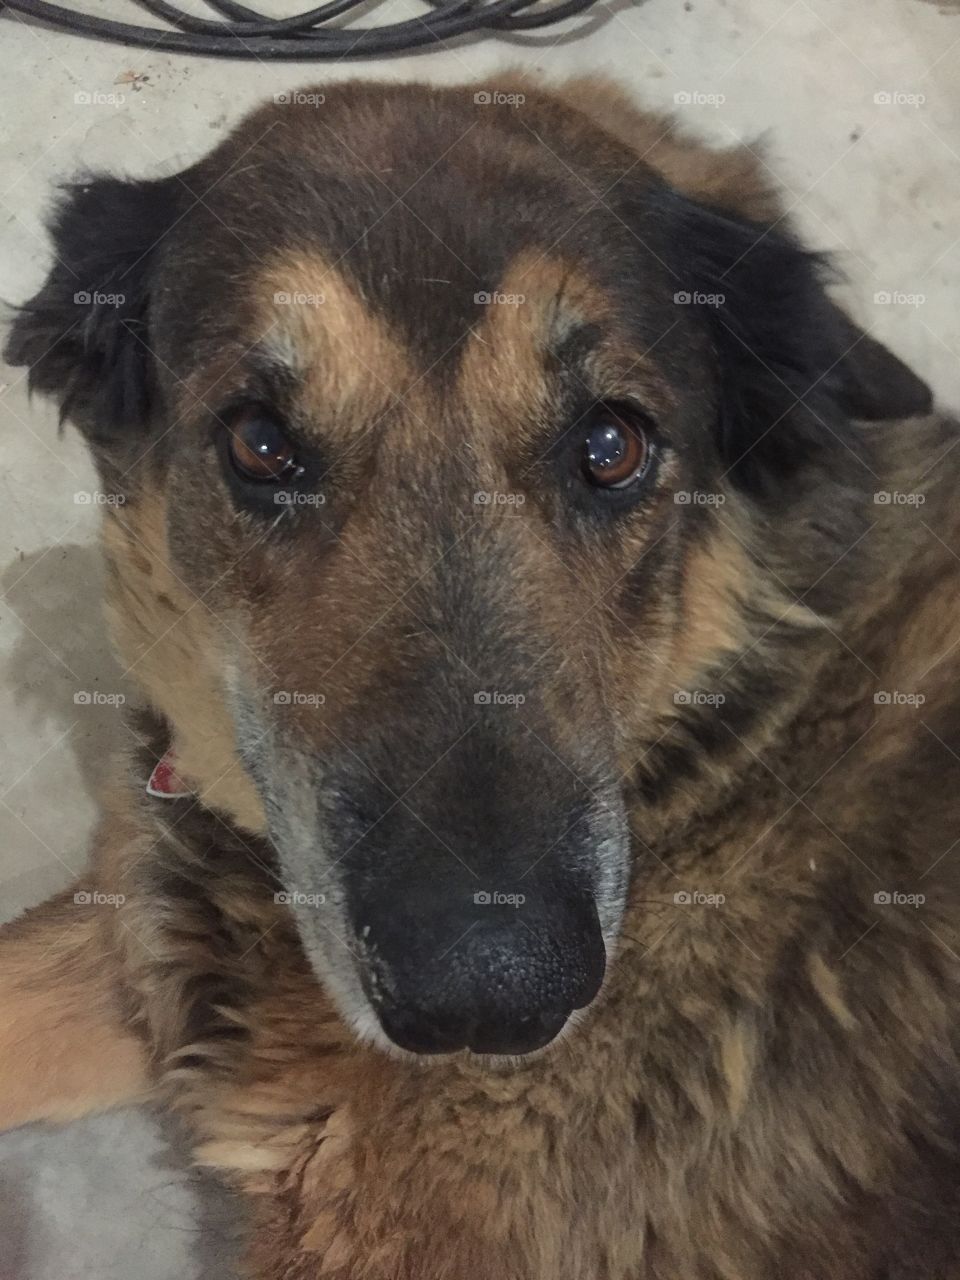 Shasta a big beautiful old dog She always has sparkling eyes when she looks at you it’s as if she’s looking deep into your soul